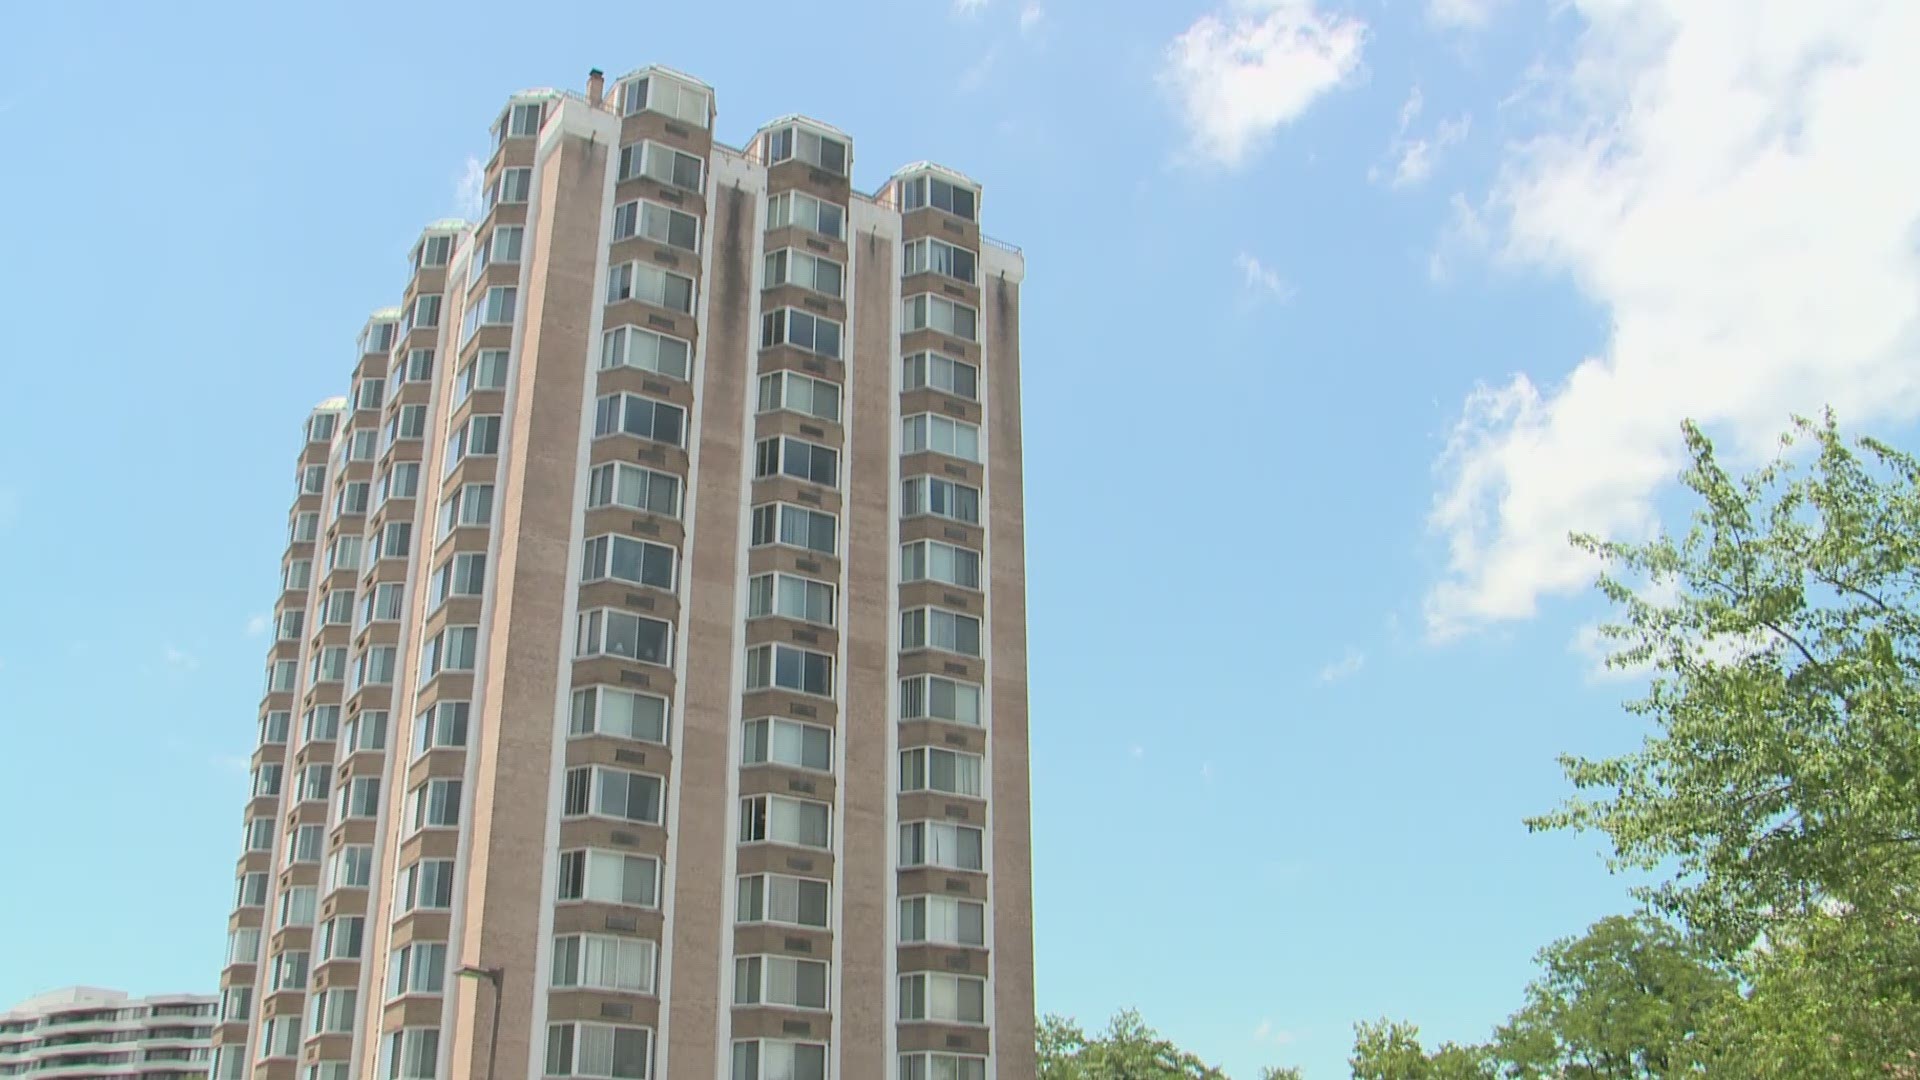 Residents of 140 unit high rise ordered to stay out of the sweltering dark building.